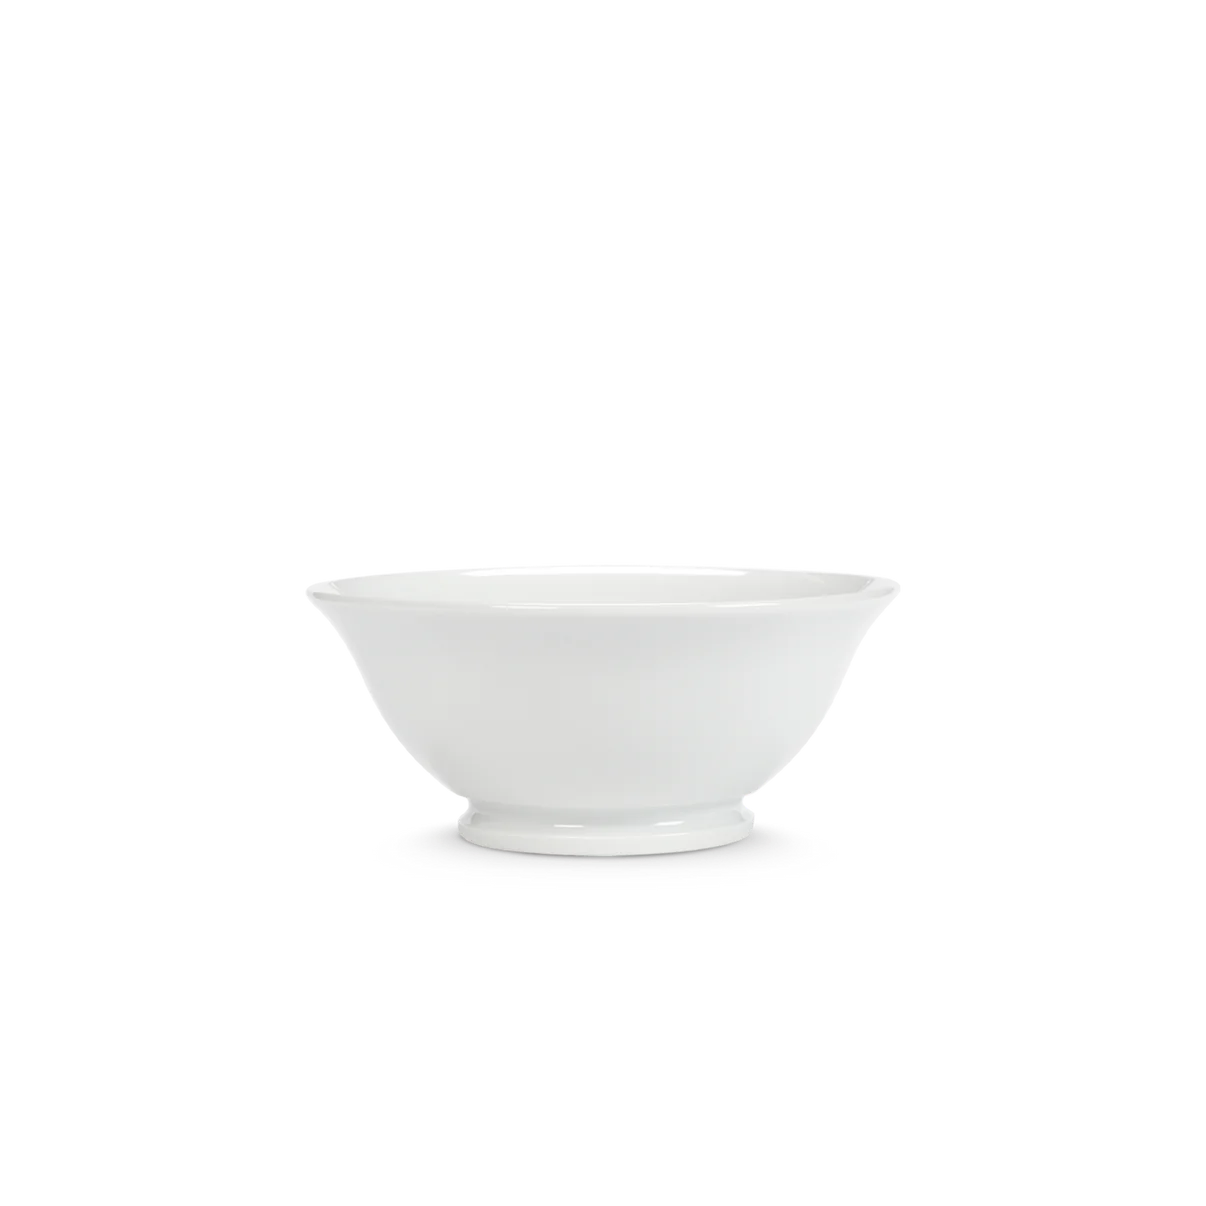 Classic Footed Bowl - Cassandra's Kitchen